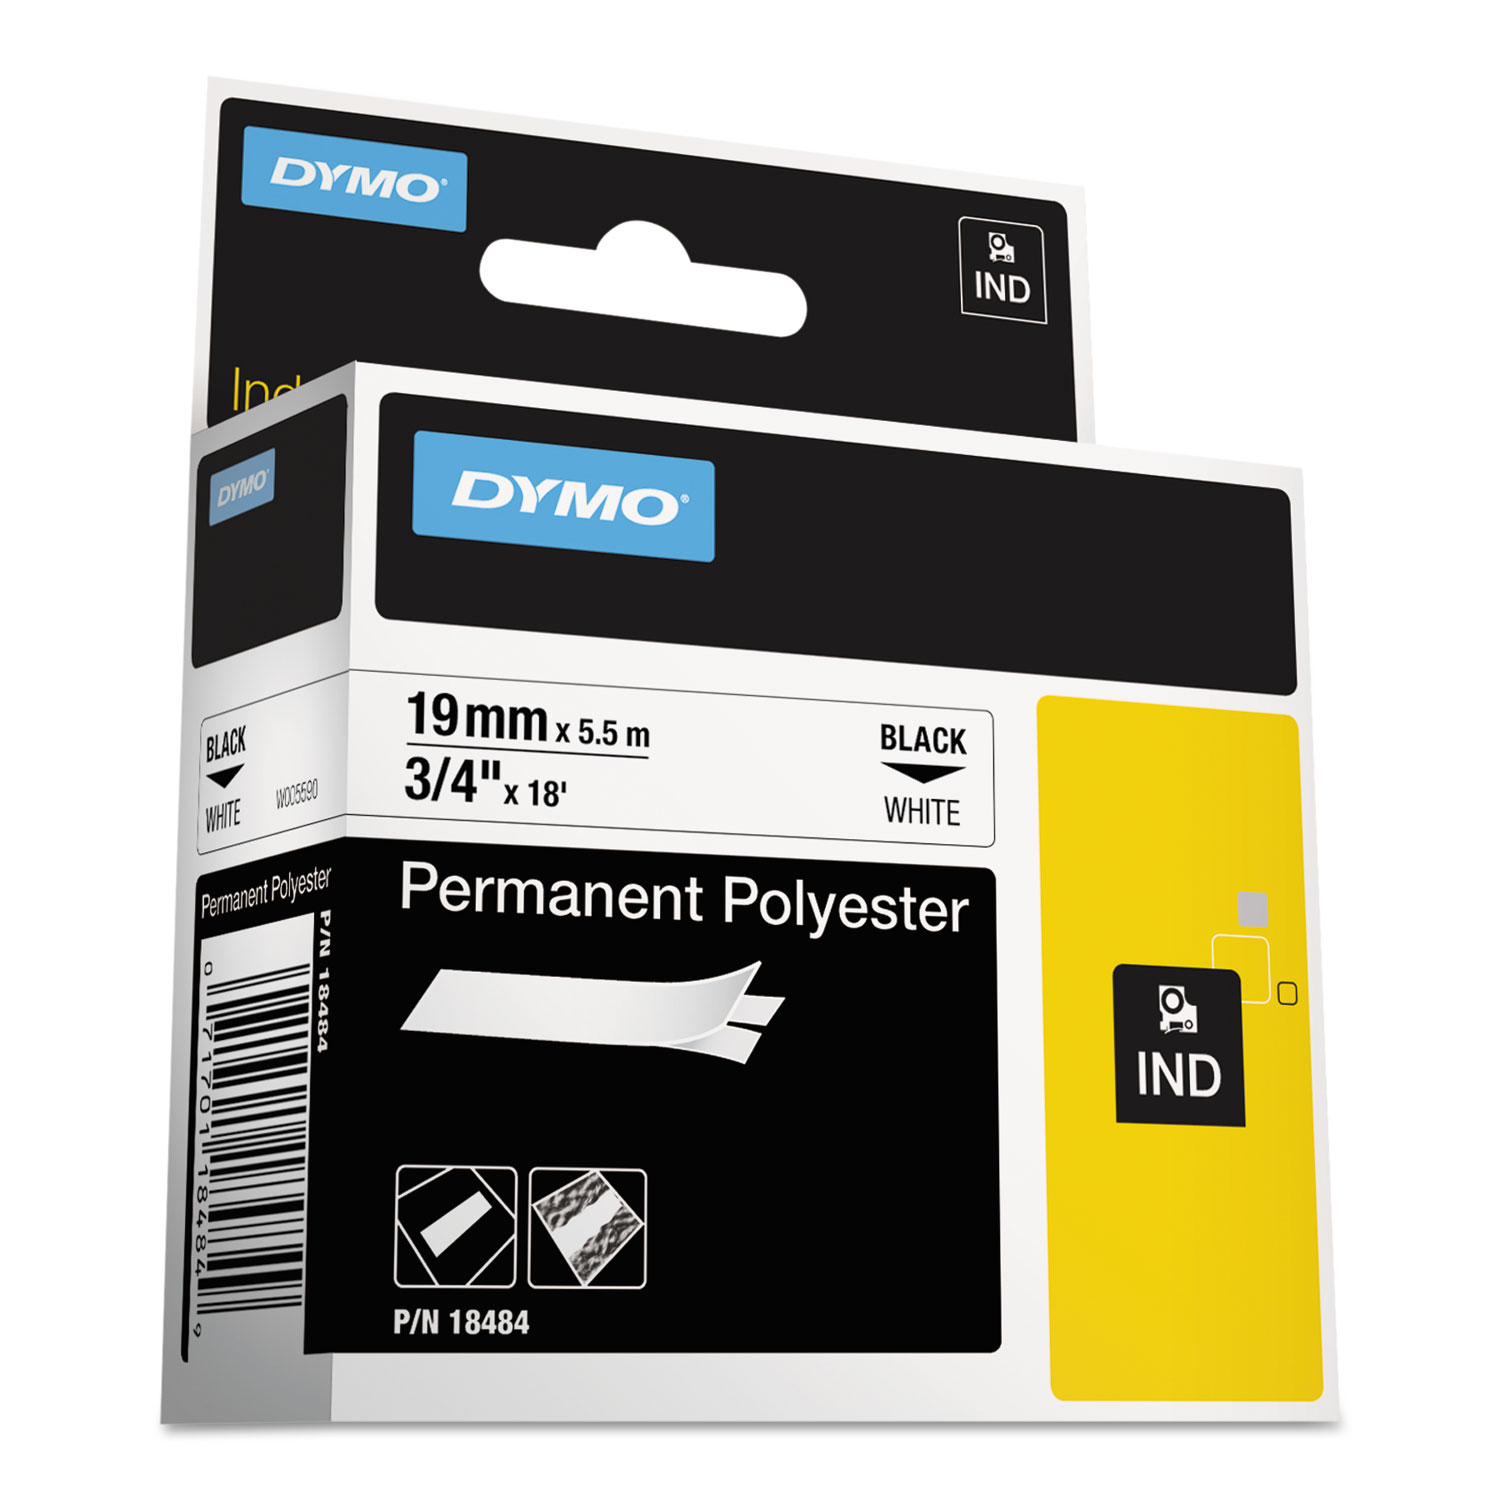 Rhino Permanent Poly Industrial Label Tape, 3/4 x 18 ft, White/Black Print